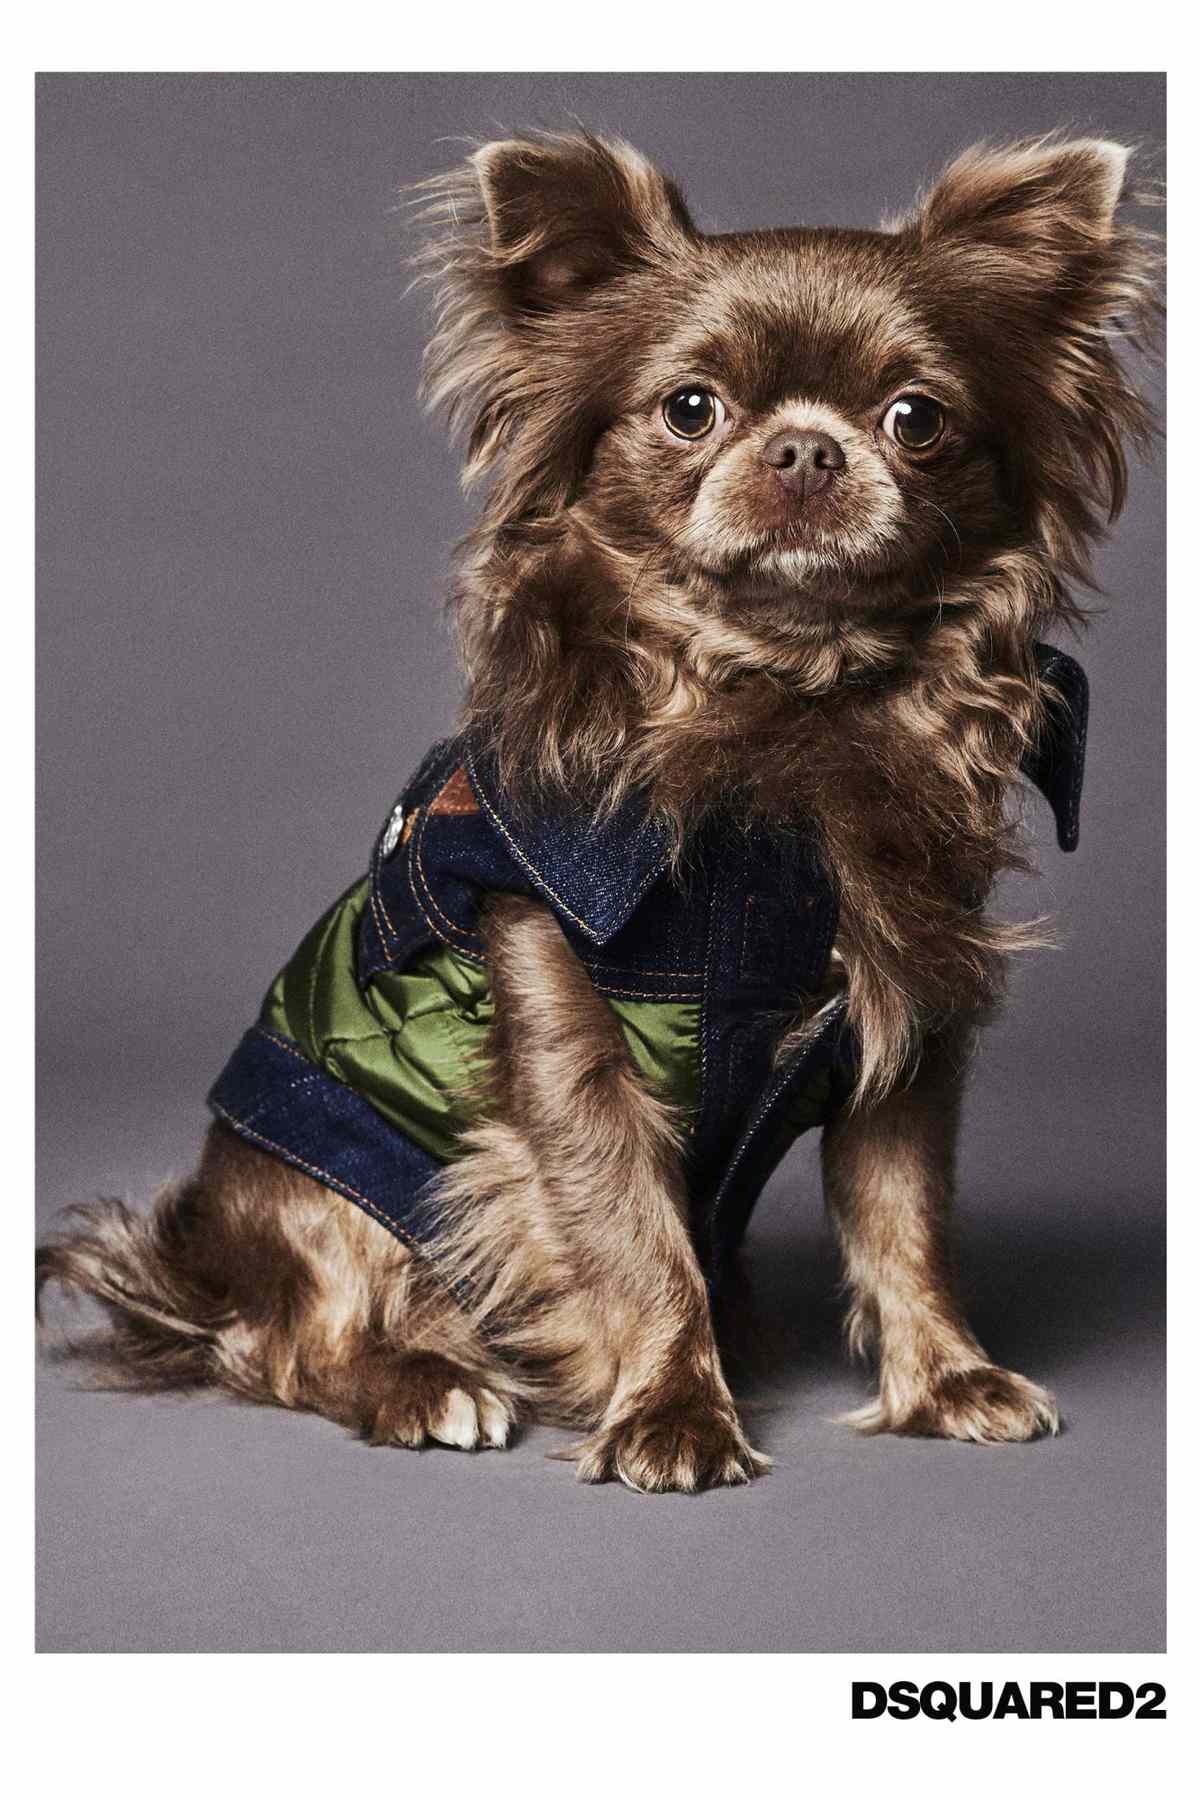 Dog wearing green and denim military vest